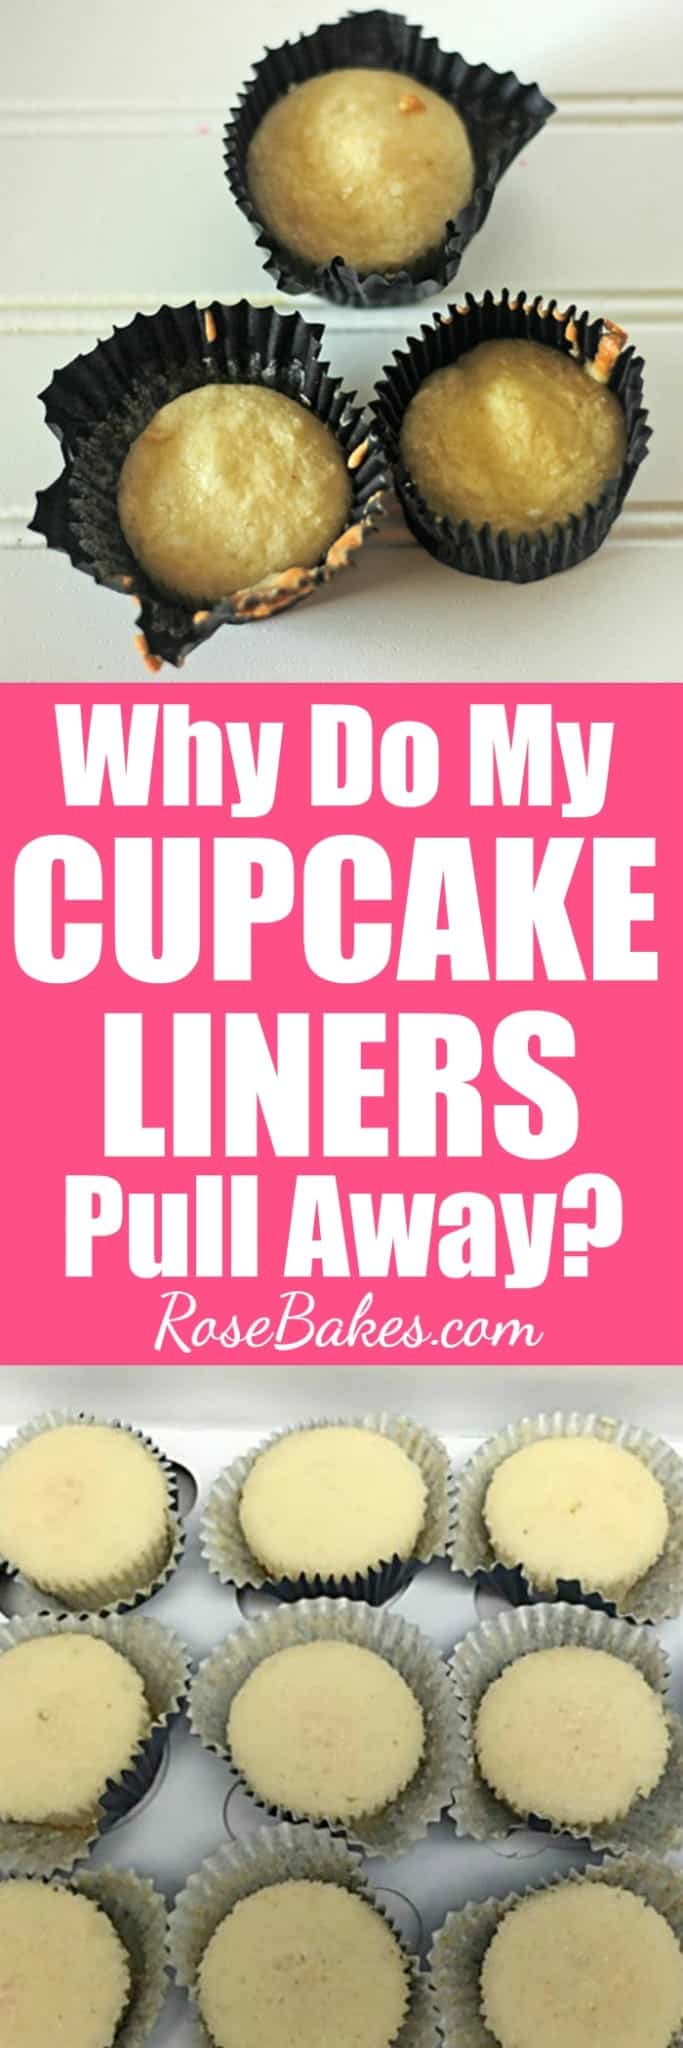 Why do my cupcake liners pull away at RoseBakes